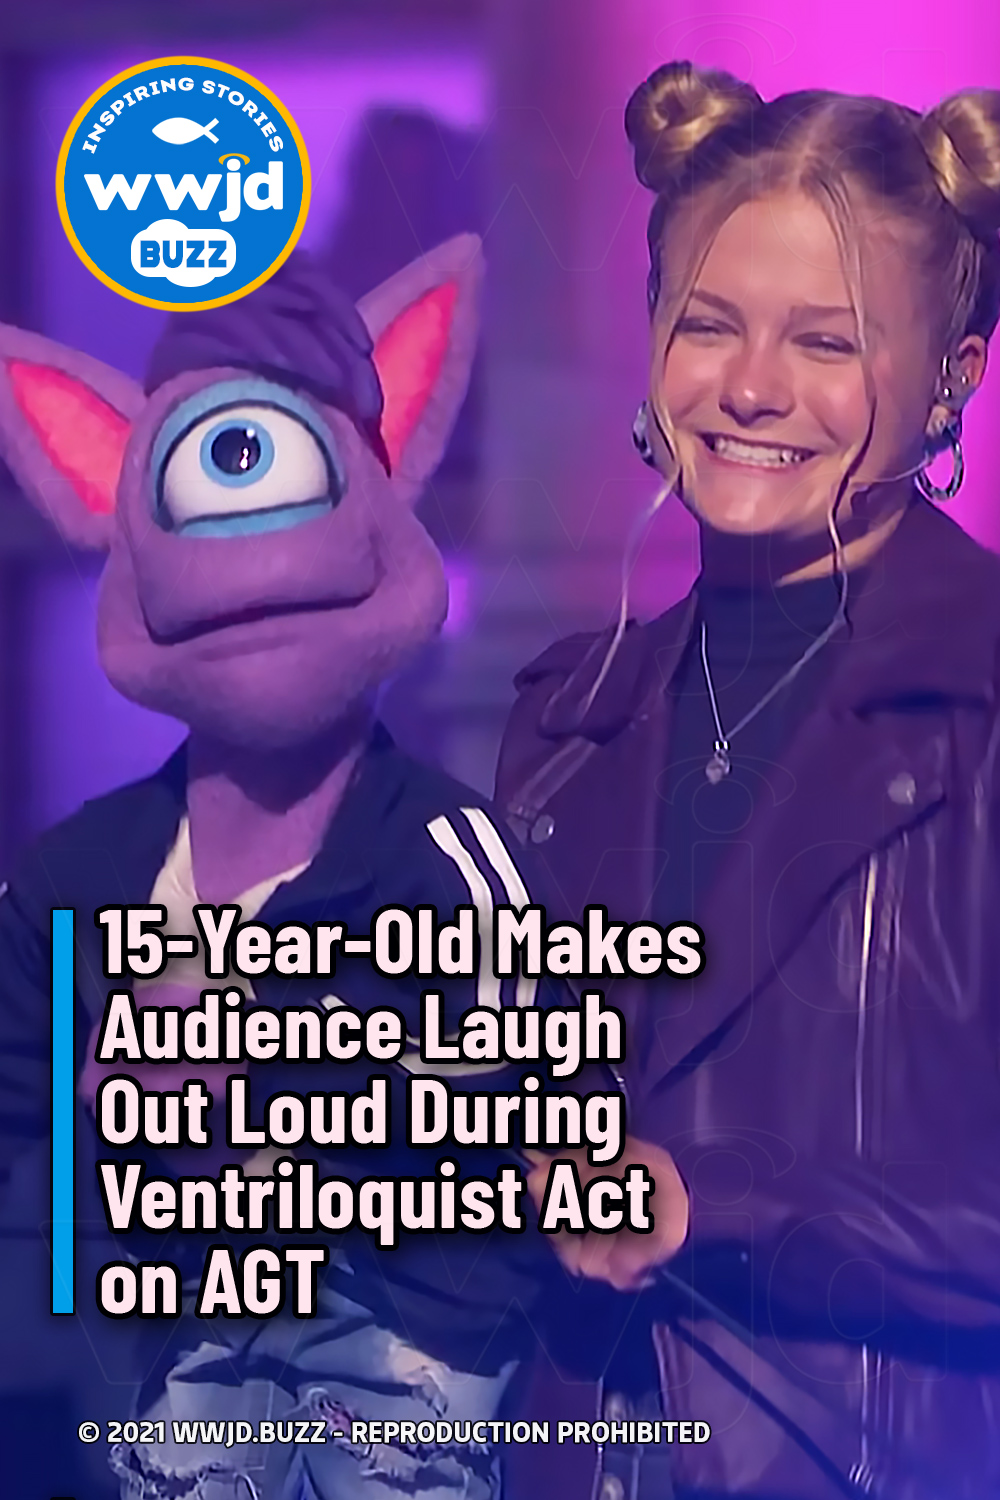 15-Year-Old Makes Audience Laugh Out Loud During Ventriloquist Act on AGT